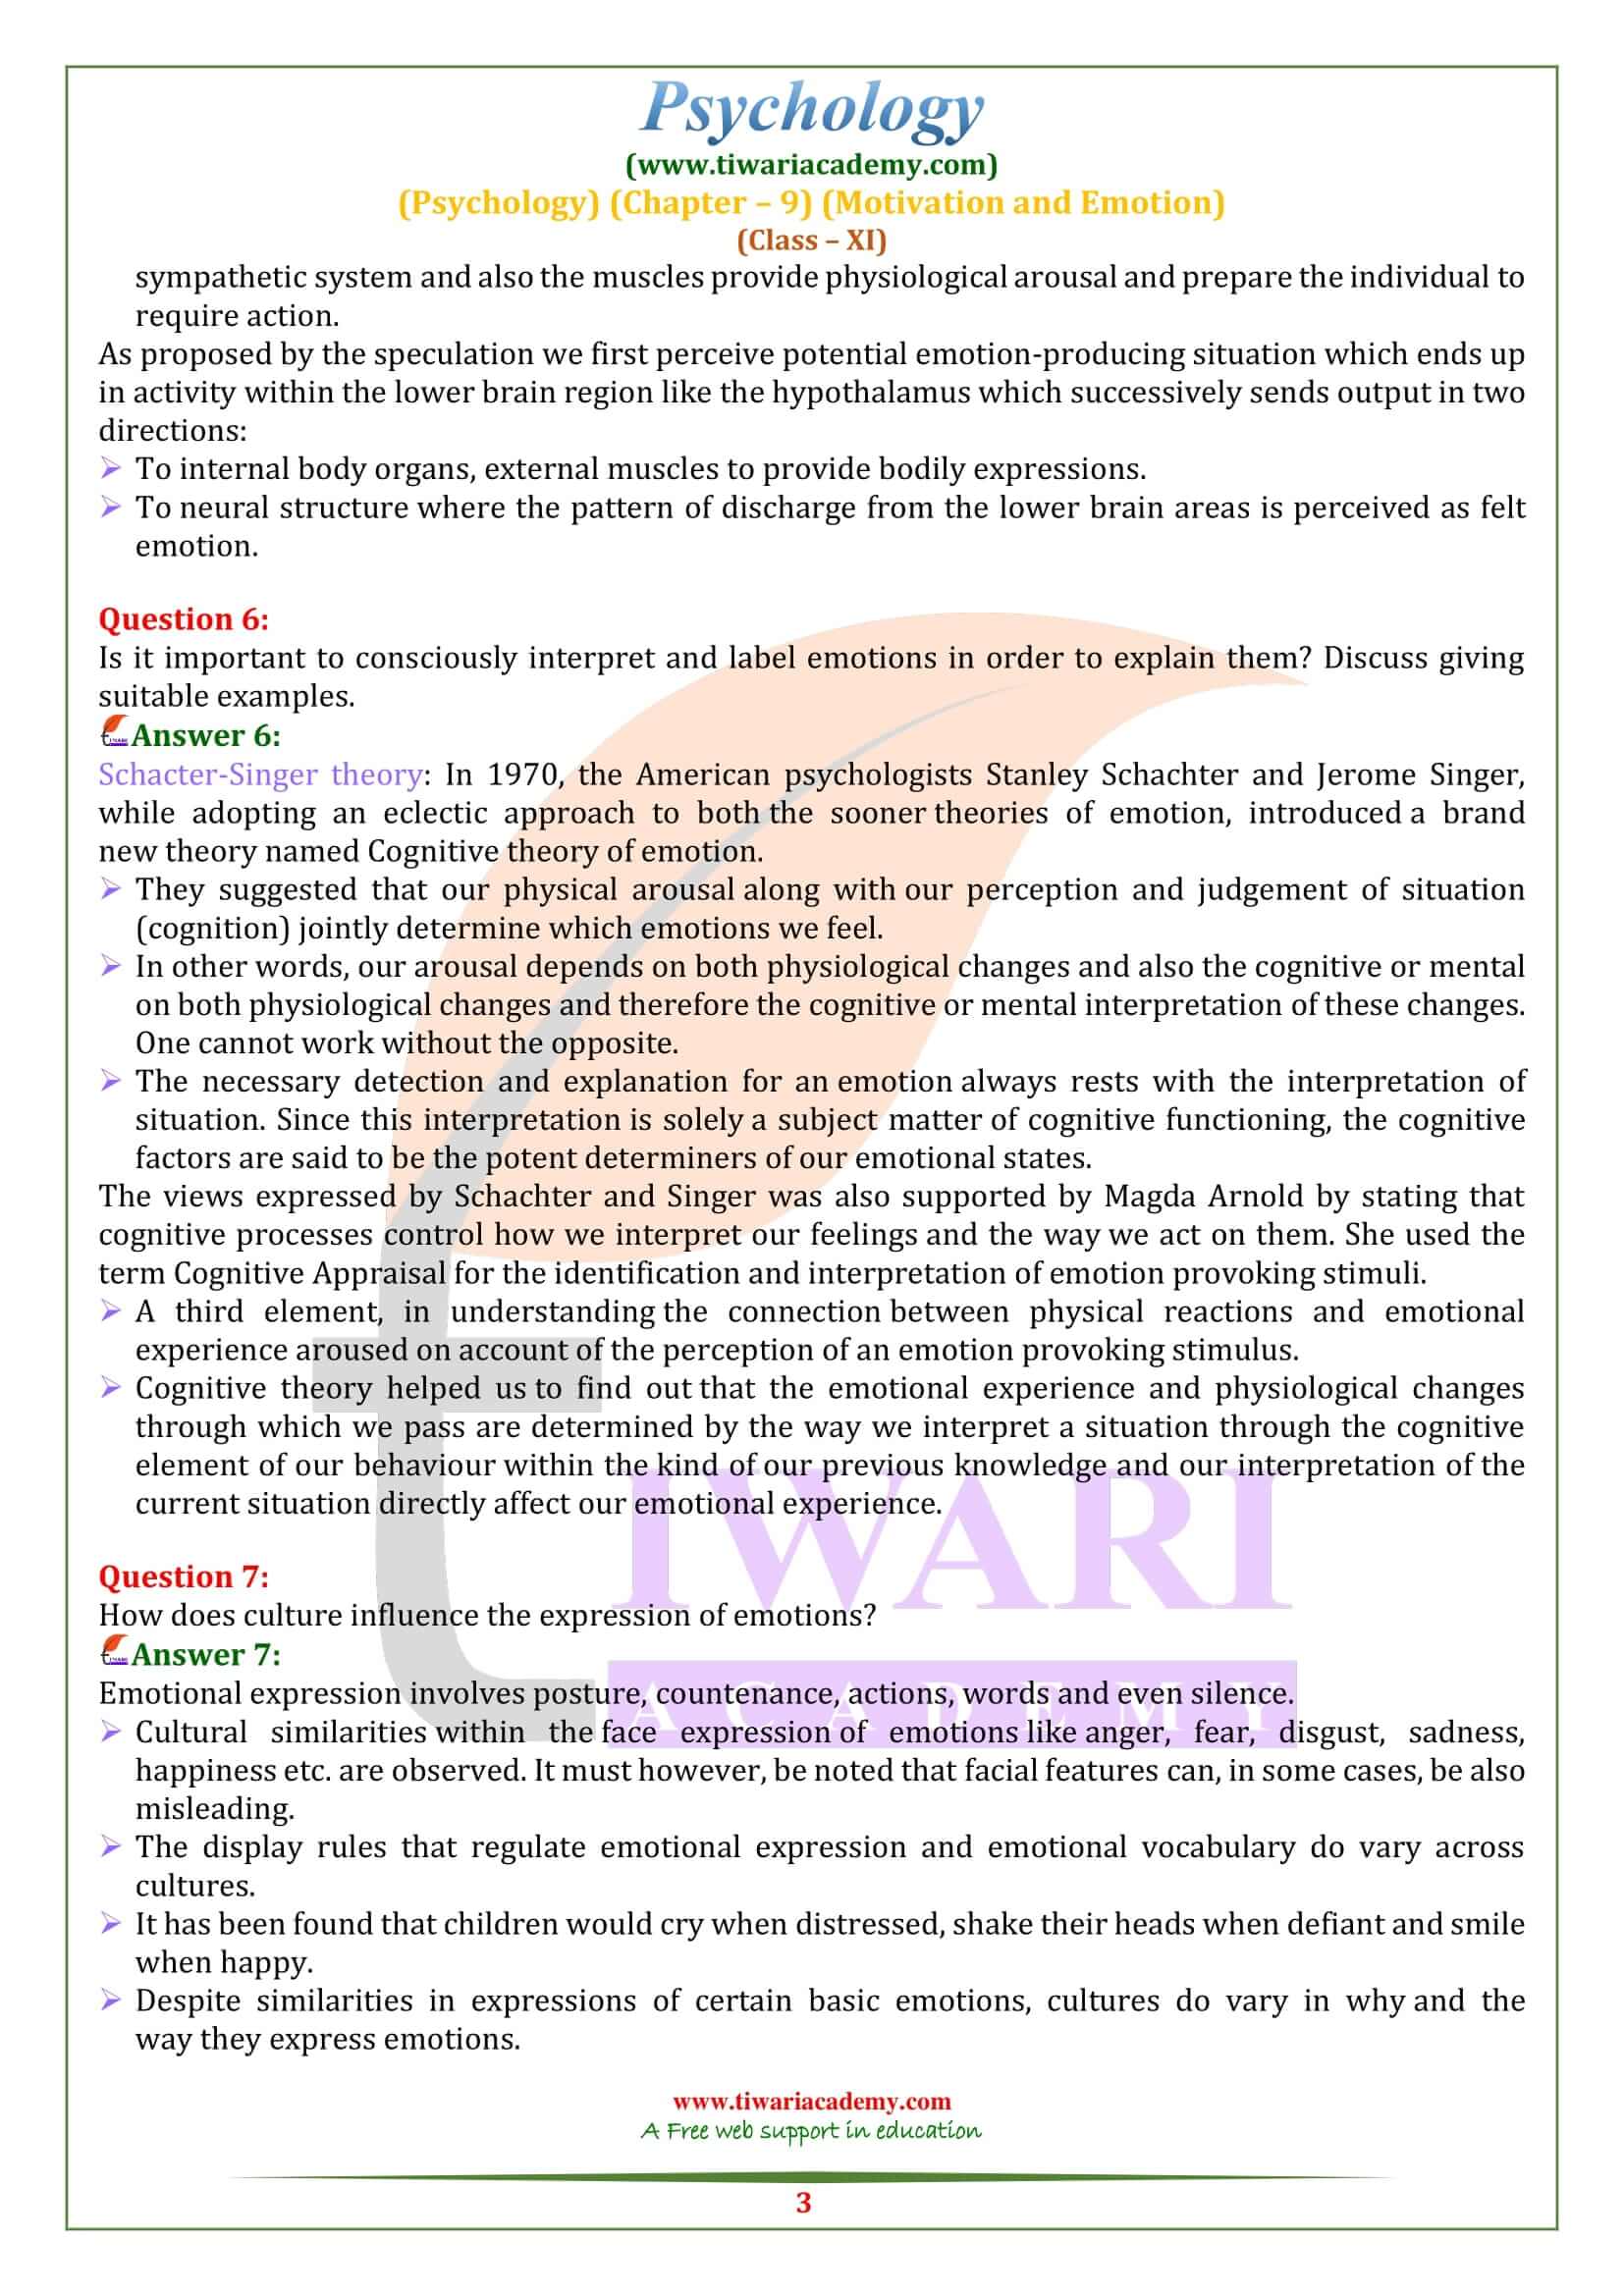 NCERT Solutions for Class 11 Psychology Chapter 9 Guide in English Medium